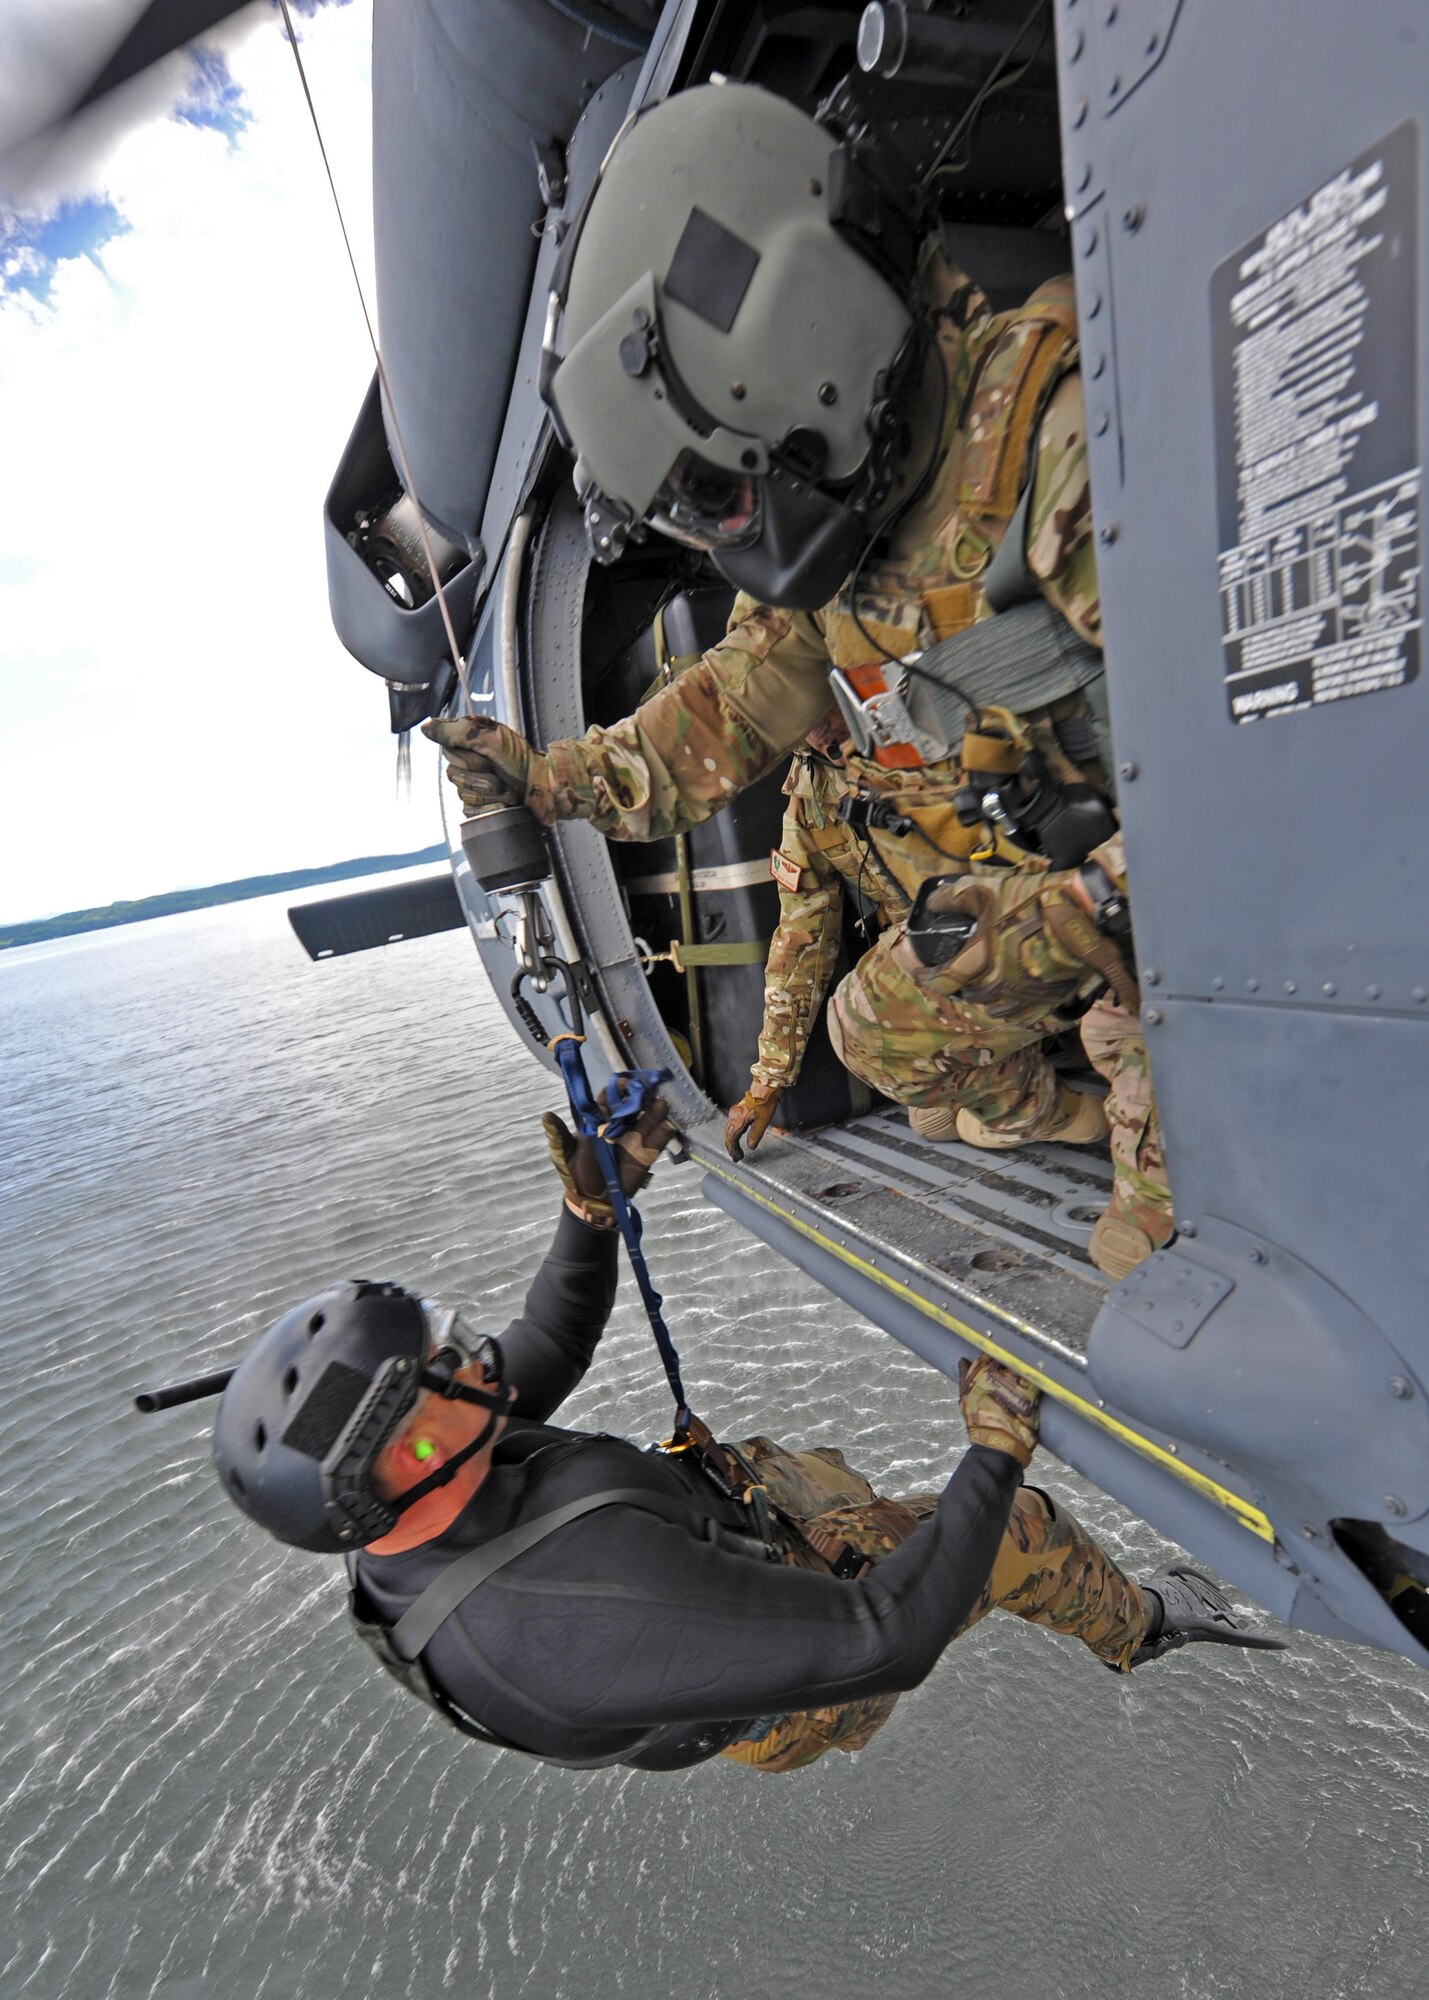 Tech. Sgt. Gary Waltz, an Air Force Reserve SERE (Survive, Evade, Resist, Escape) specialist, is hoisted from the waters of Lake Champlain, NY, during training Aug. 7. SERE specialists are part of the Guardian Angel weapons system of Air Combat Command along with pararescuemen and combat rescue officers. Waltz is assigned to the 306th Rescue Squadron, 943rd Rescue Group, Davis-Monthan Air Force Base, Ariz. (U.S. Air Force photo by Carolyn Herrick)
